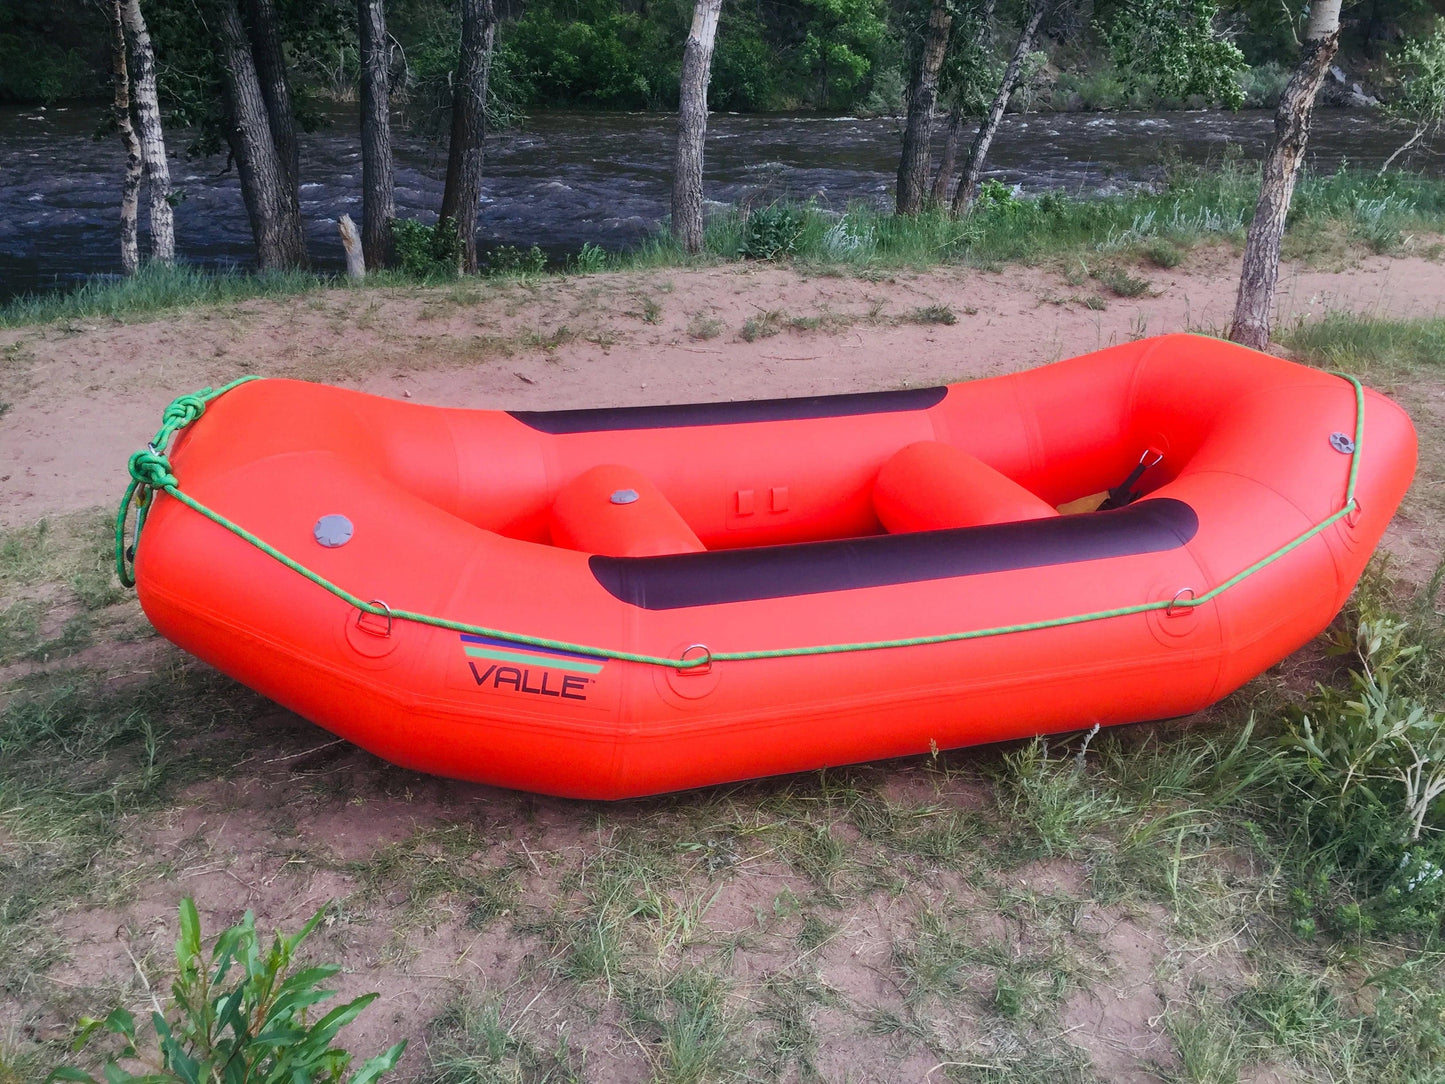 Featuring the Taquito 9' Raft raft manufactured by Valle shown here from one angle.